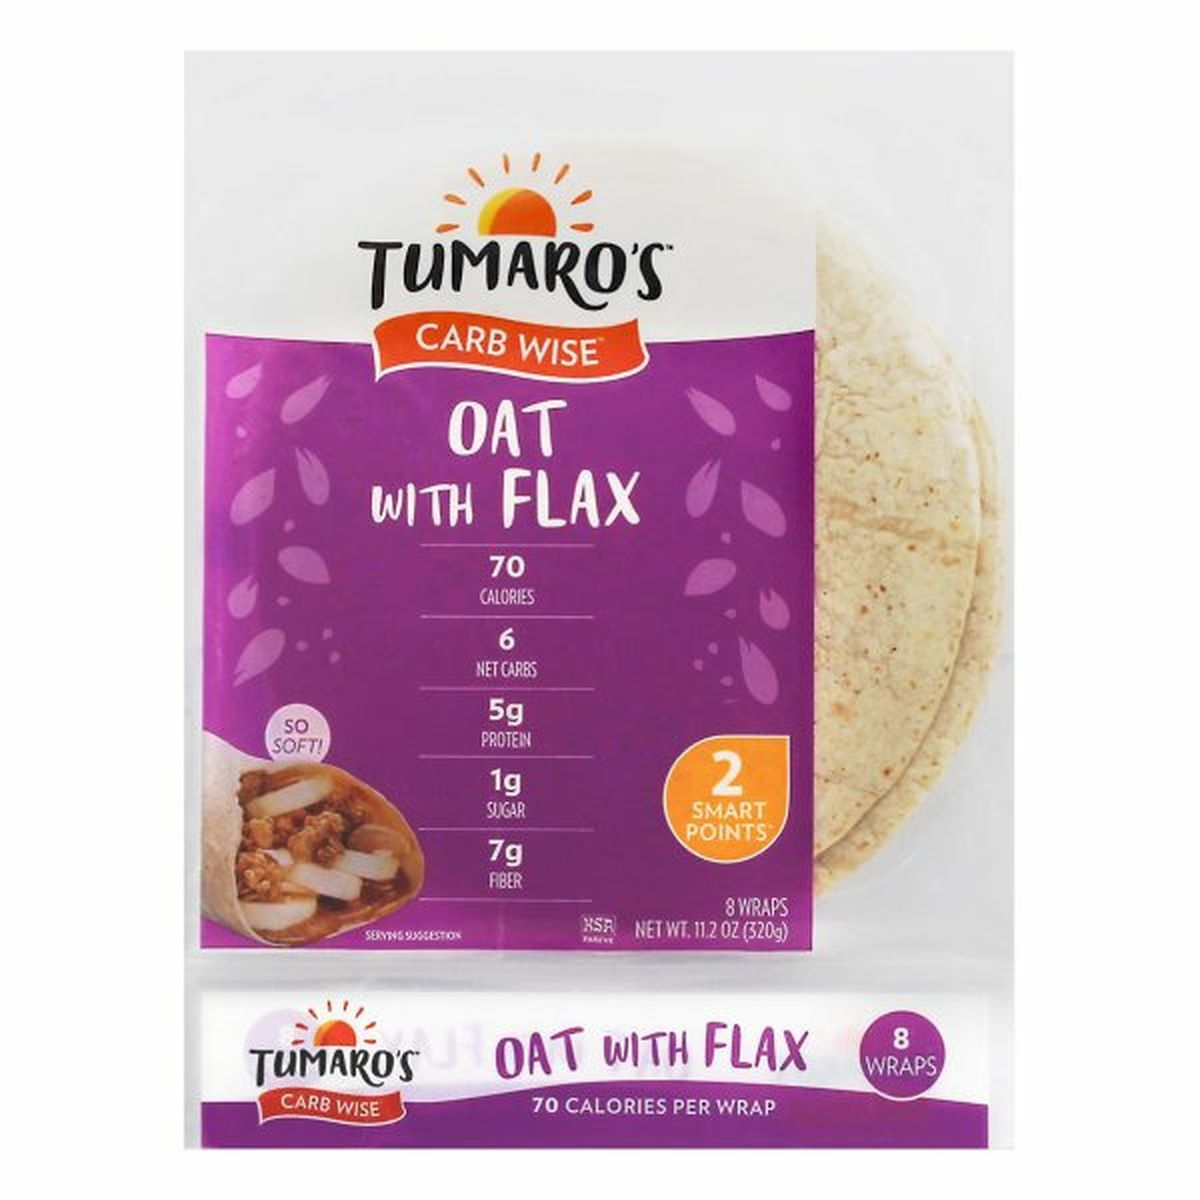 Calories in Tumaro's Carb Wise Wraps, Oat with Flax